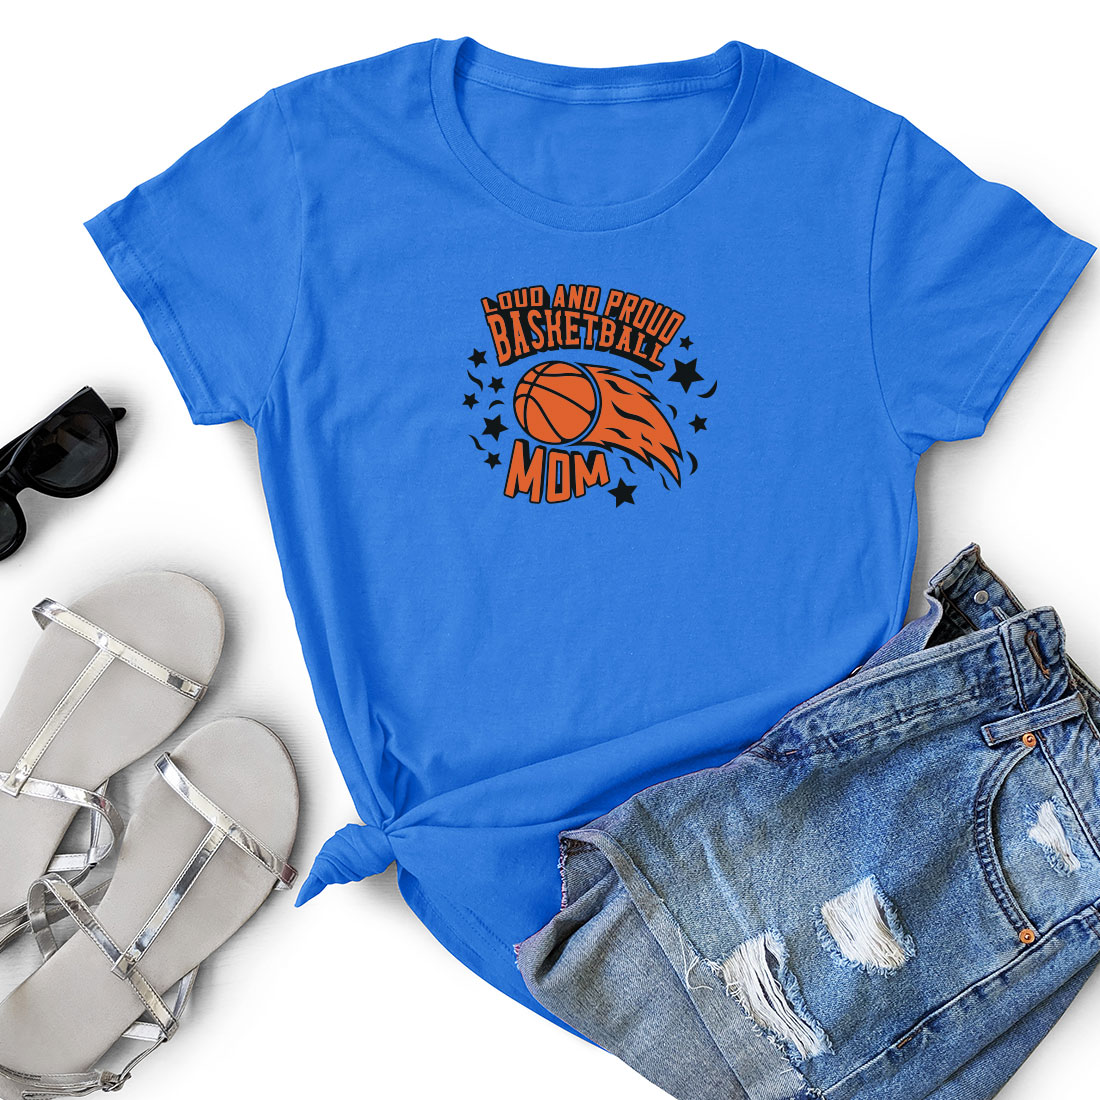 T - shirt with a basketball on it next to a pair of shorts.